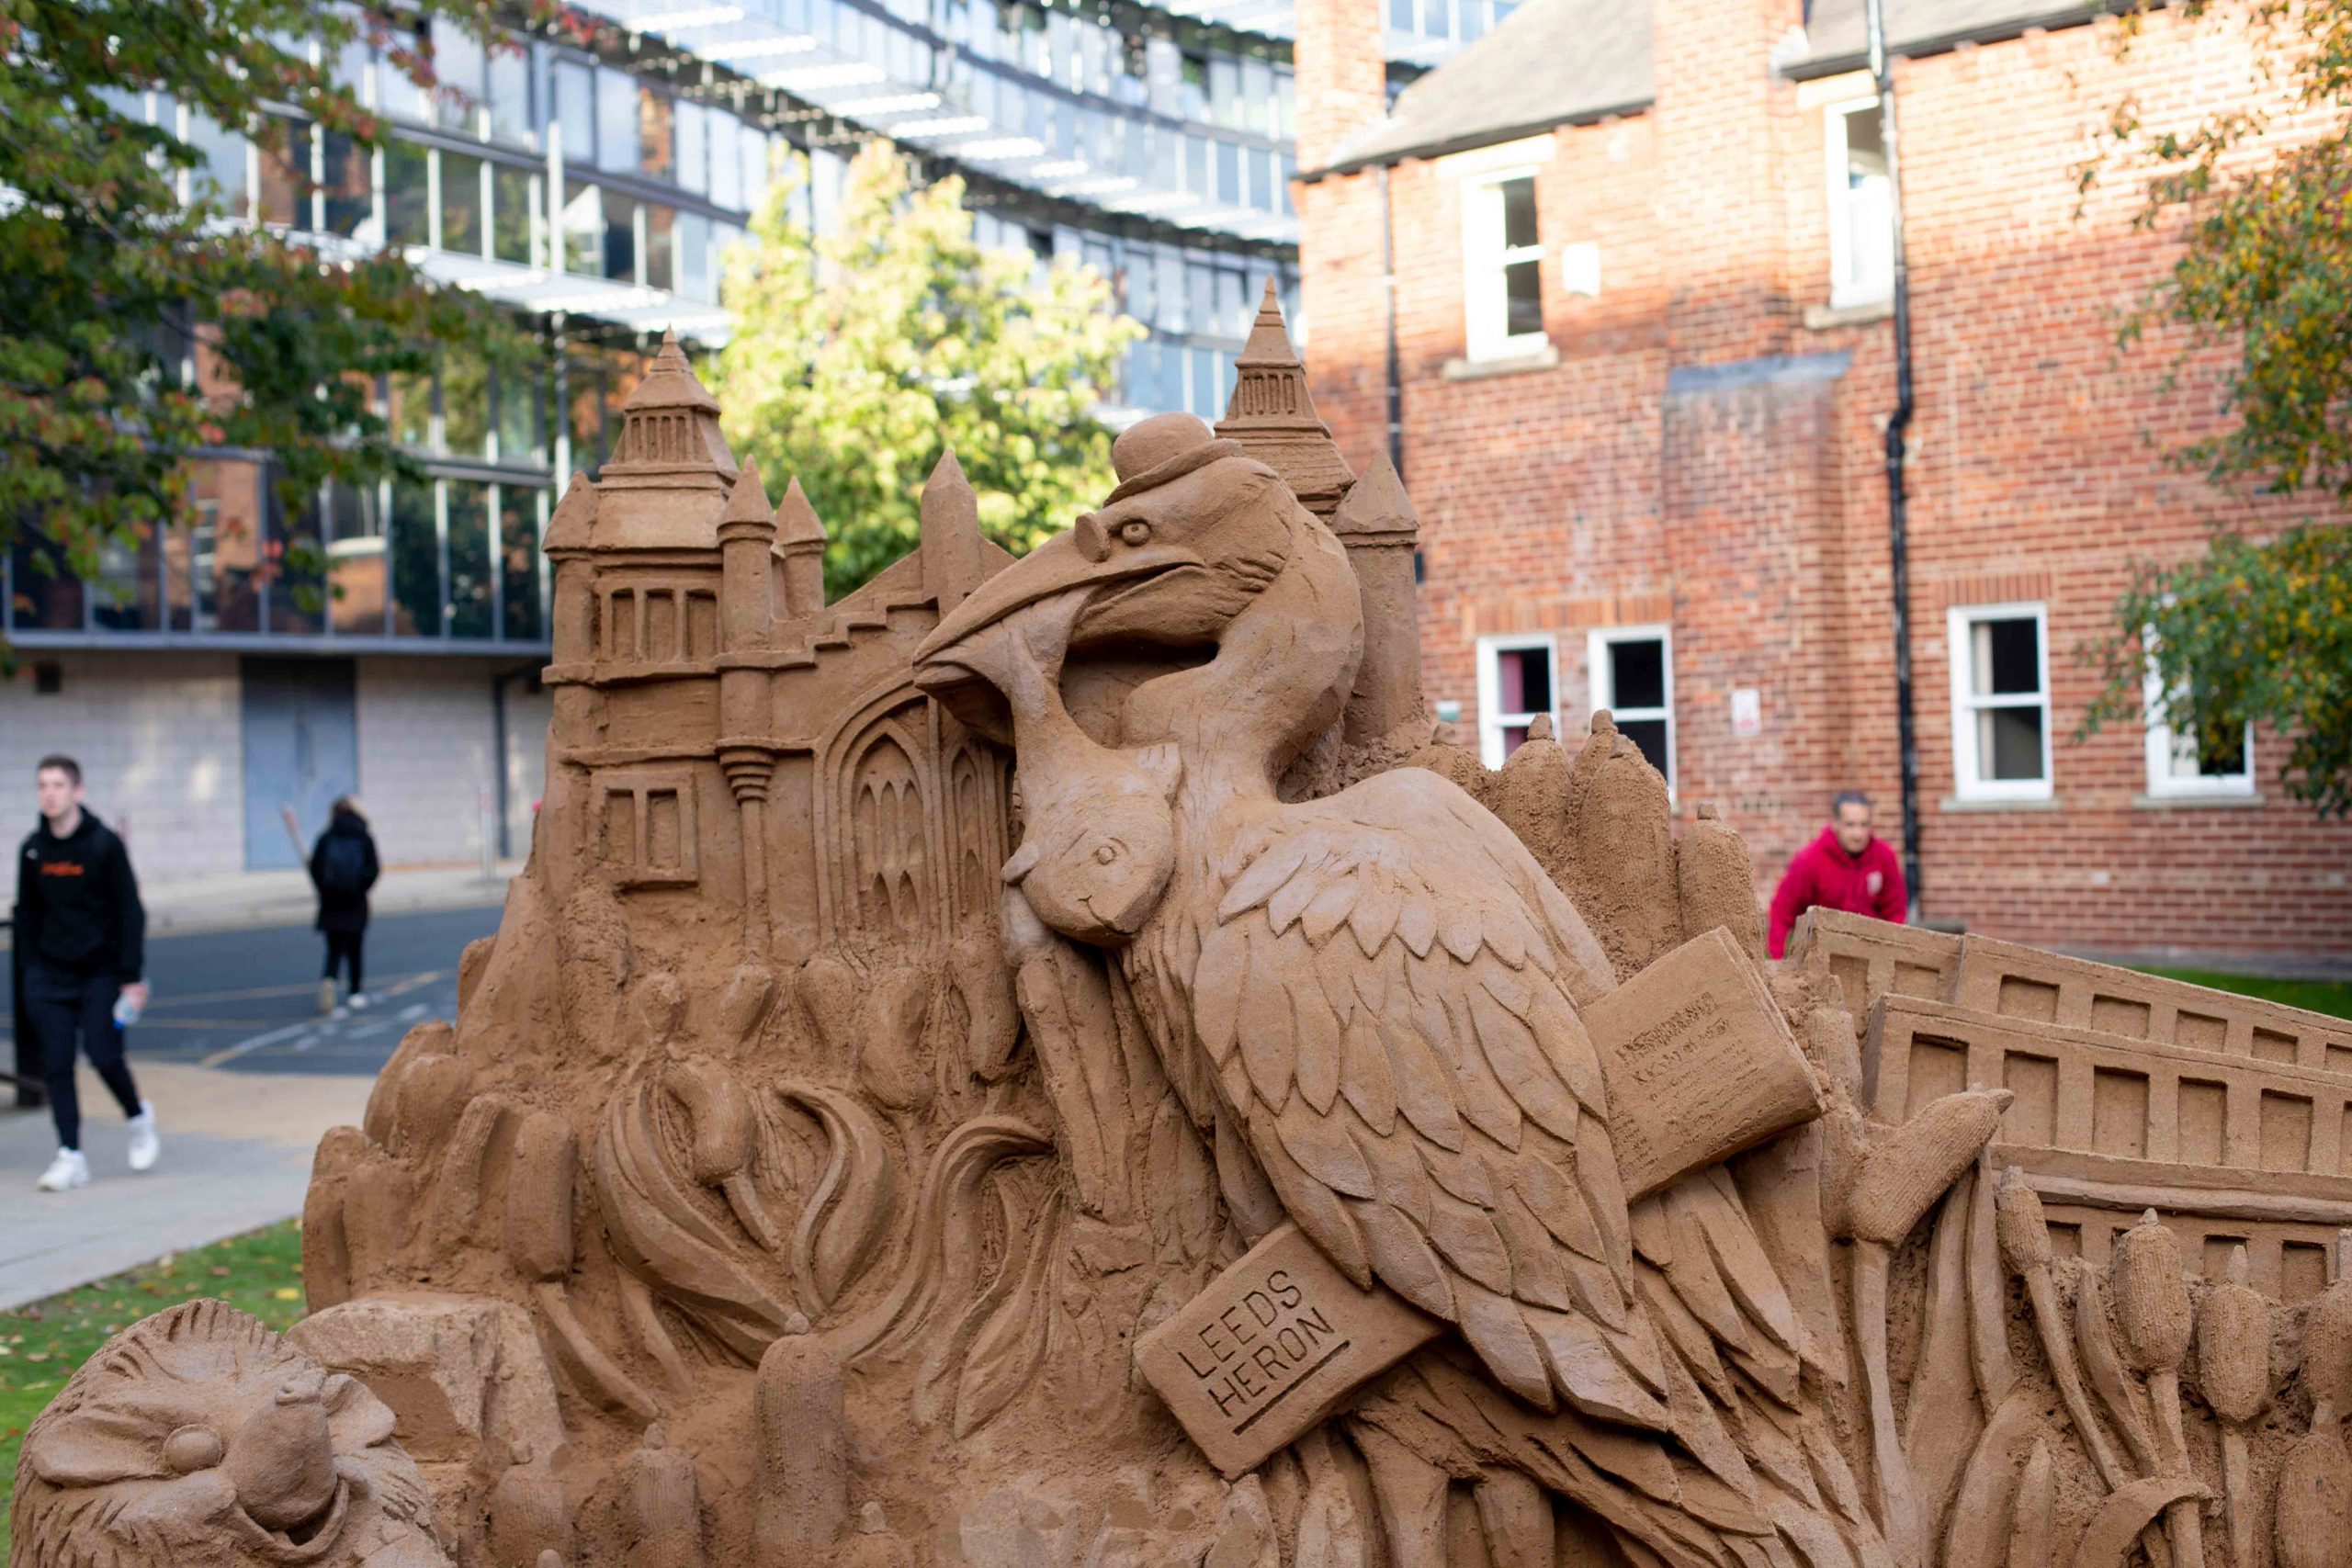 Giant Sand Sculpture and Ice bar for The University of Leeds #CampusLive Event